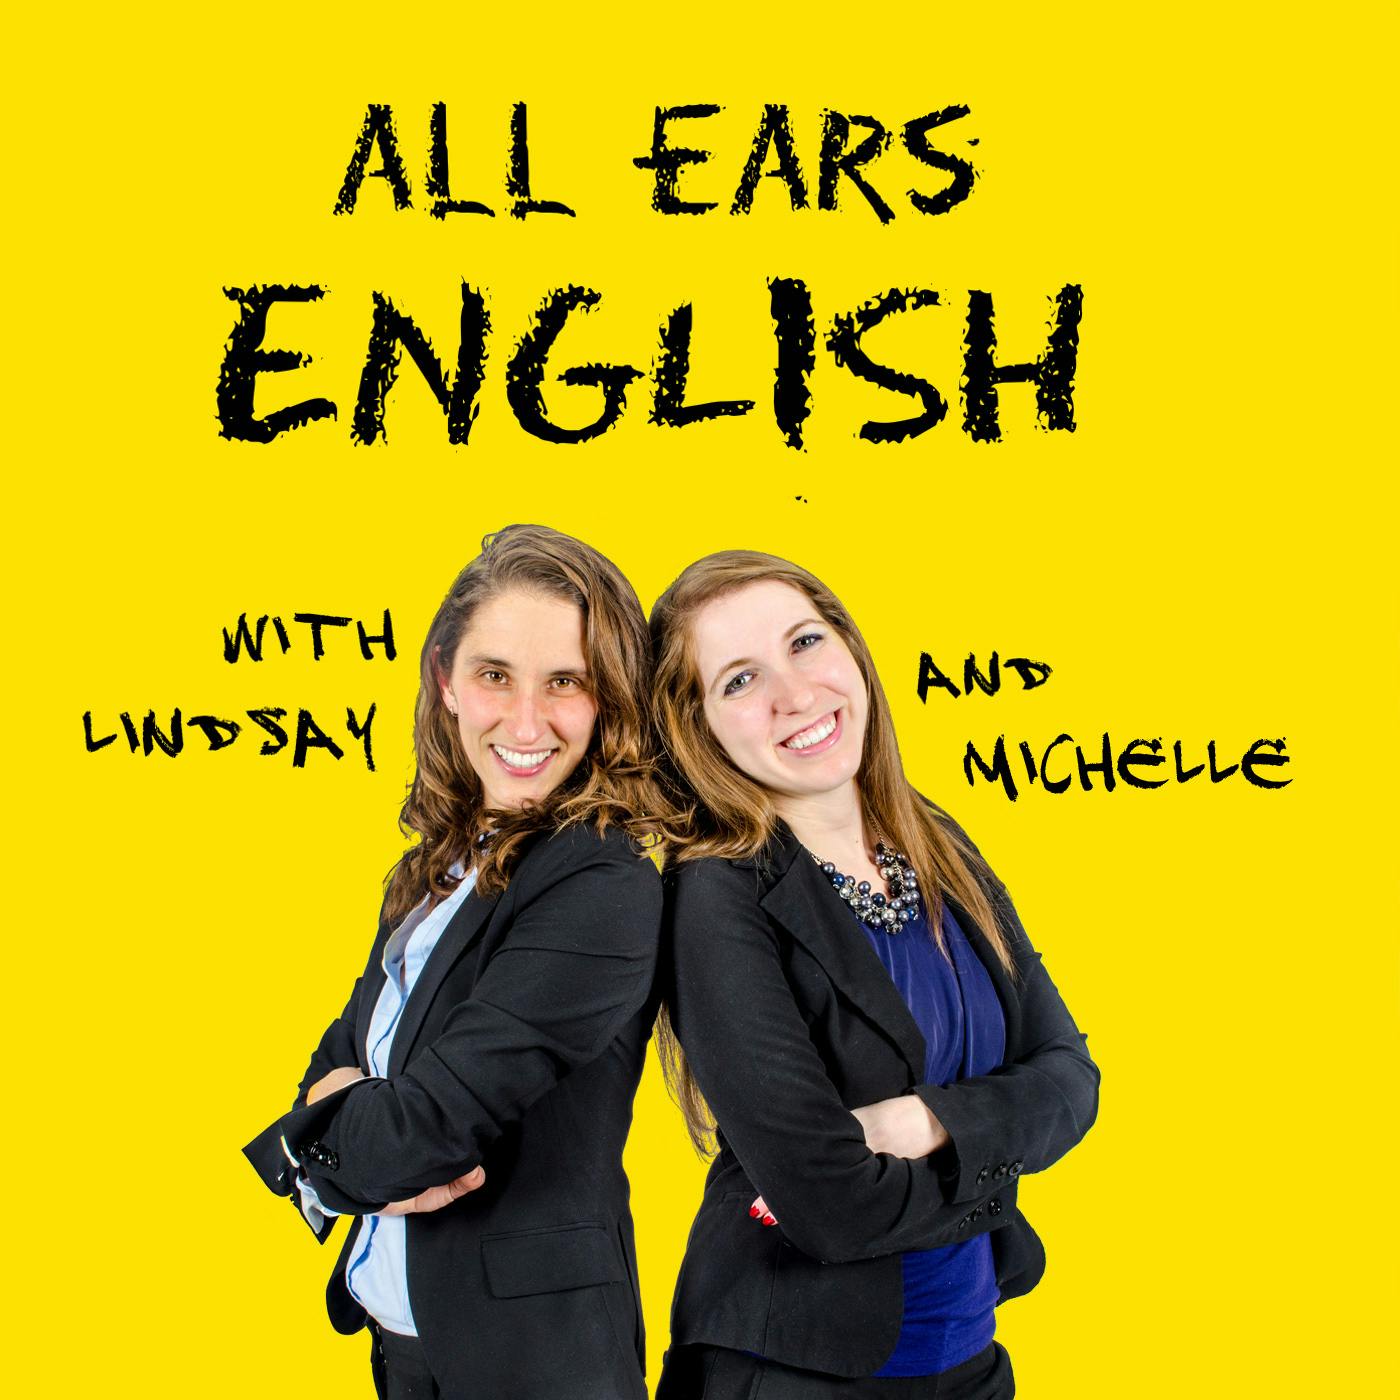 AEE 1232: Should You Ask Someone's Age in English?